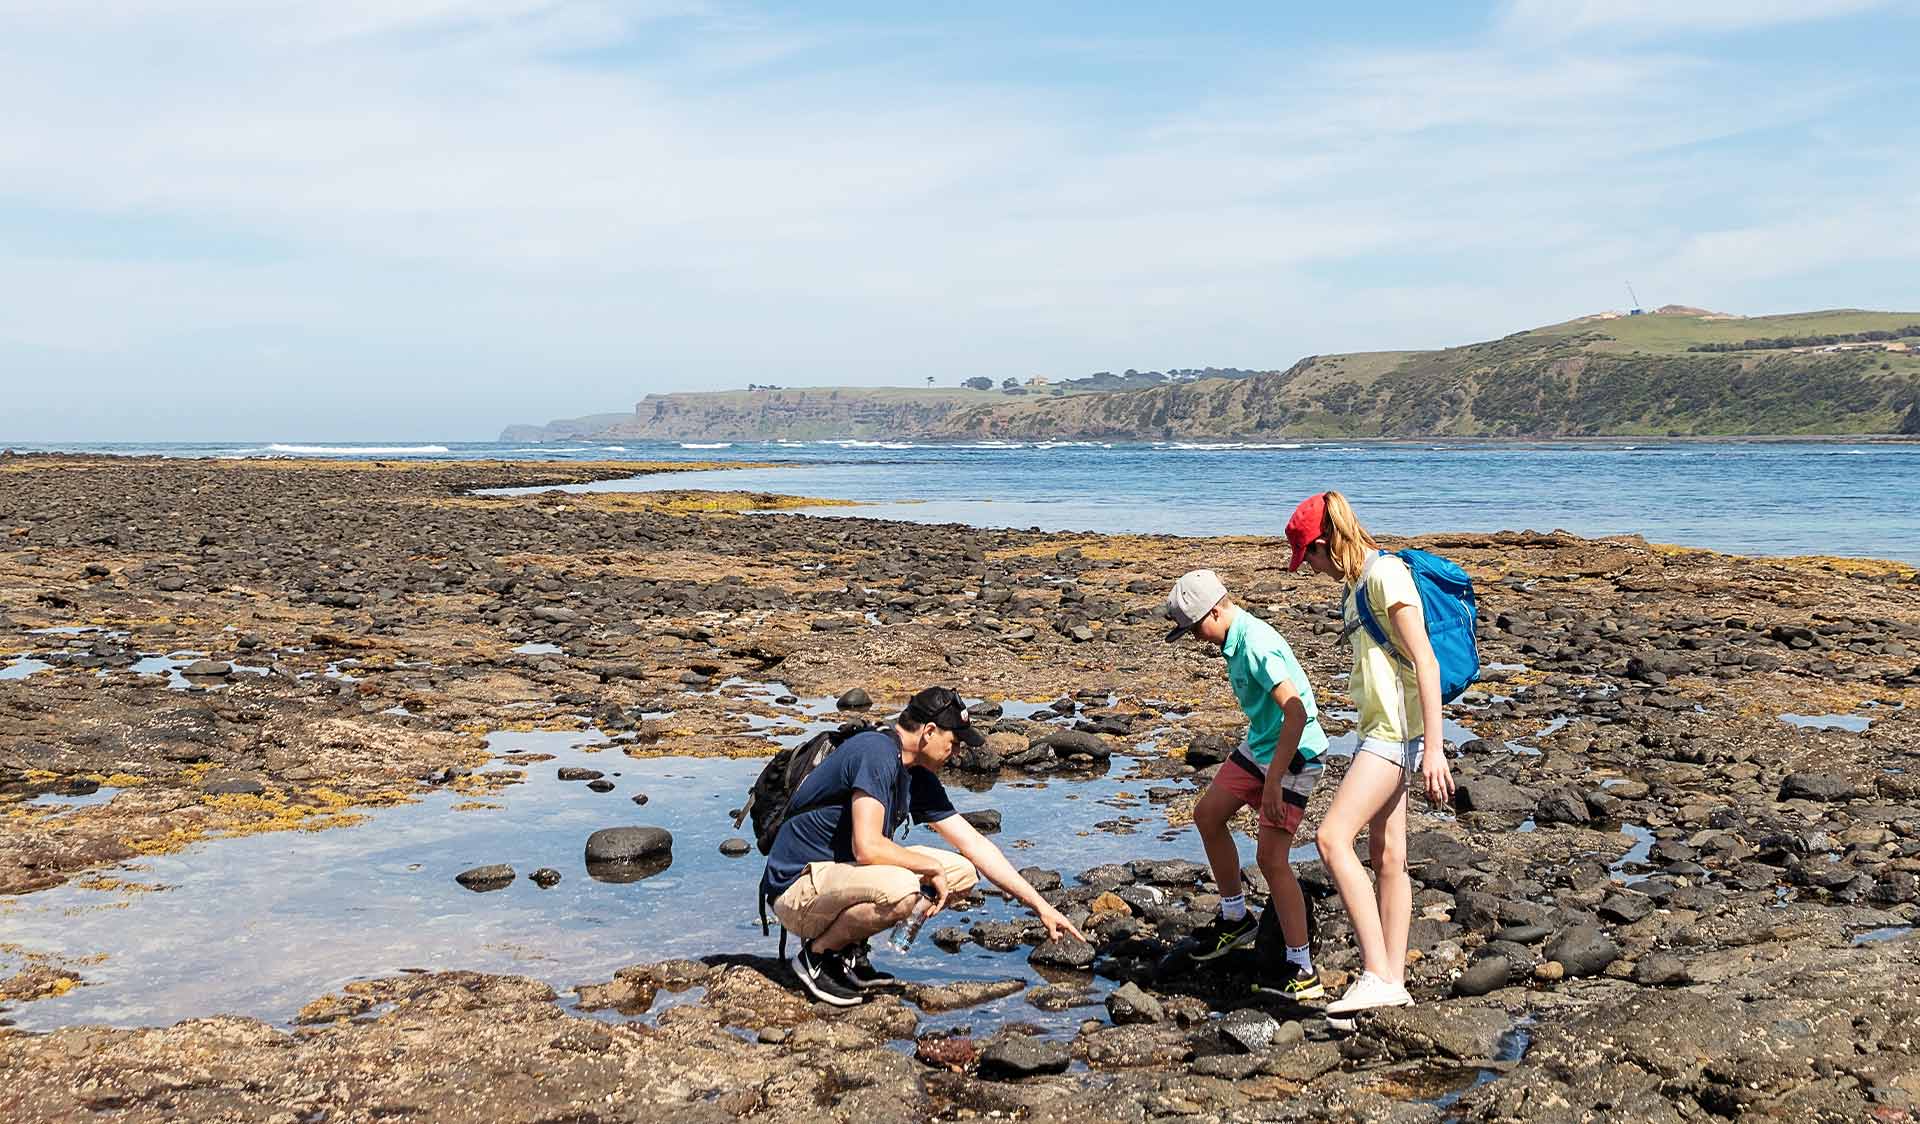 A father goes rockpooling with his two young children at Mushroom Reef.